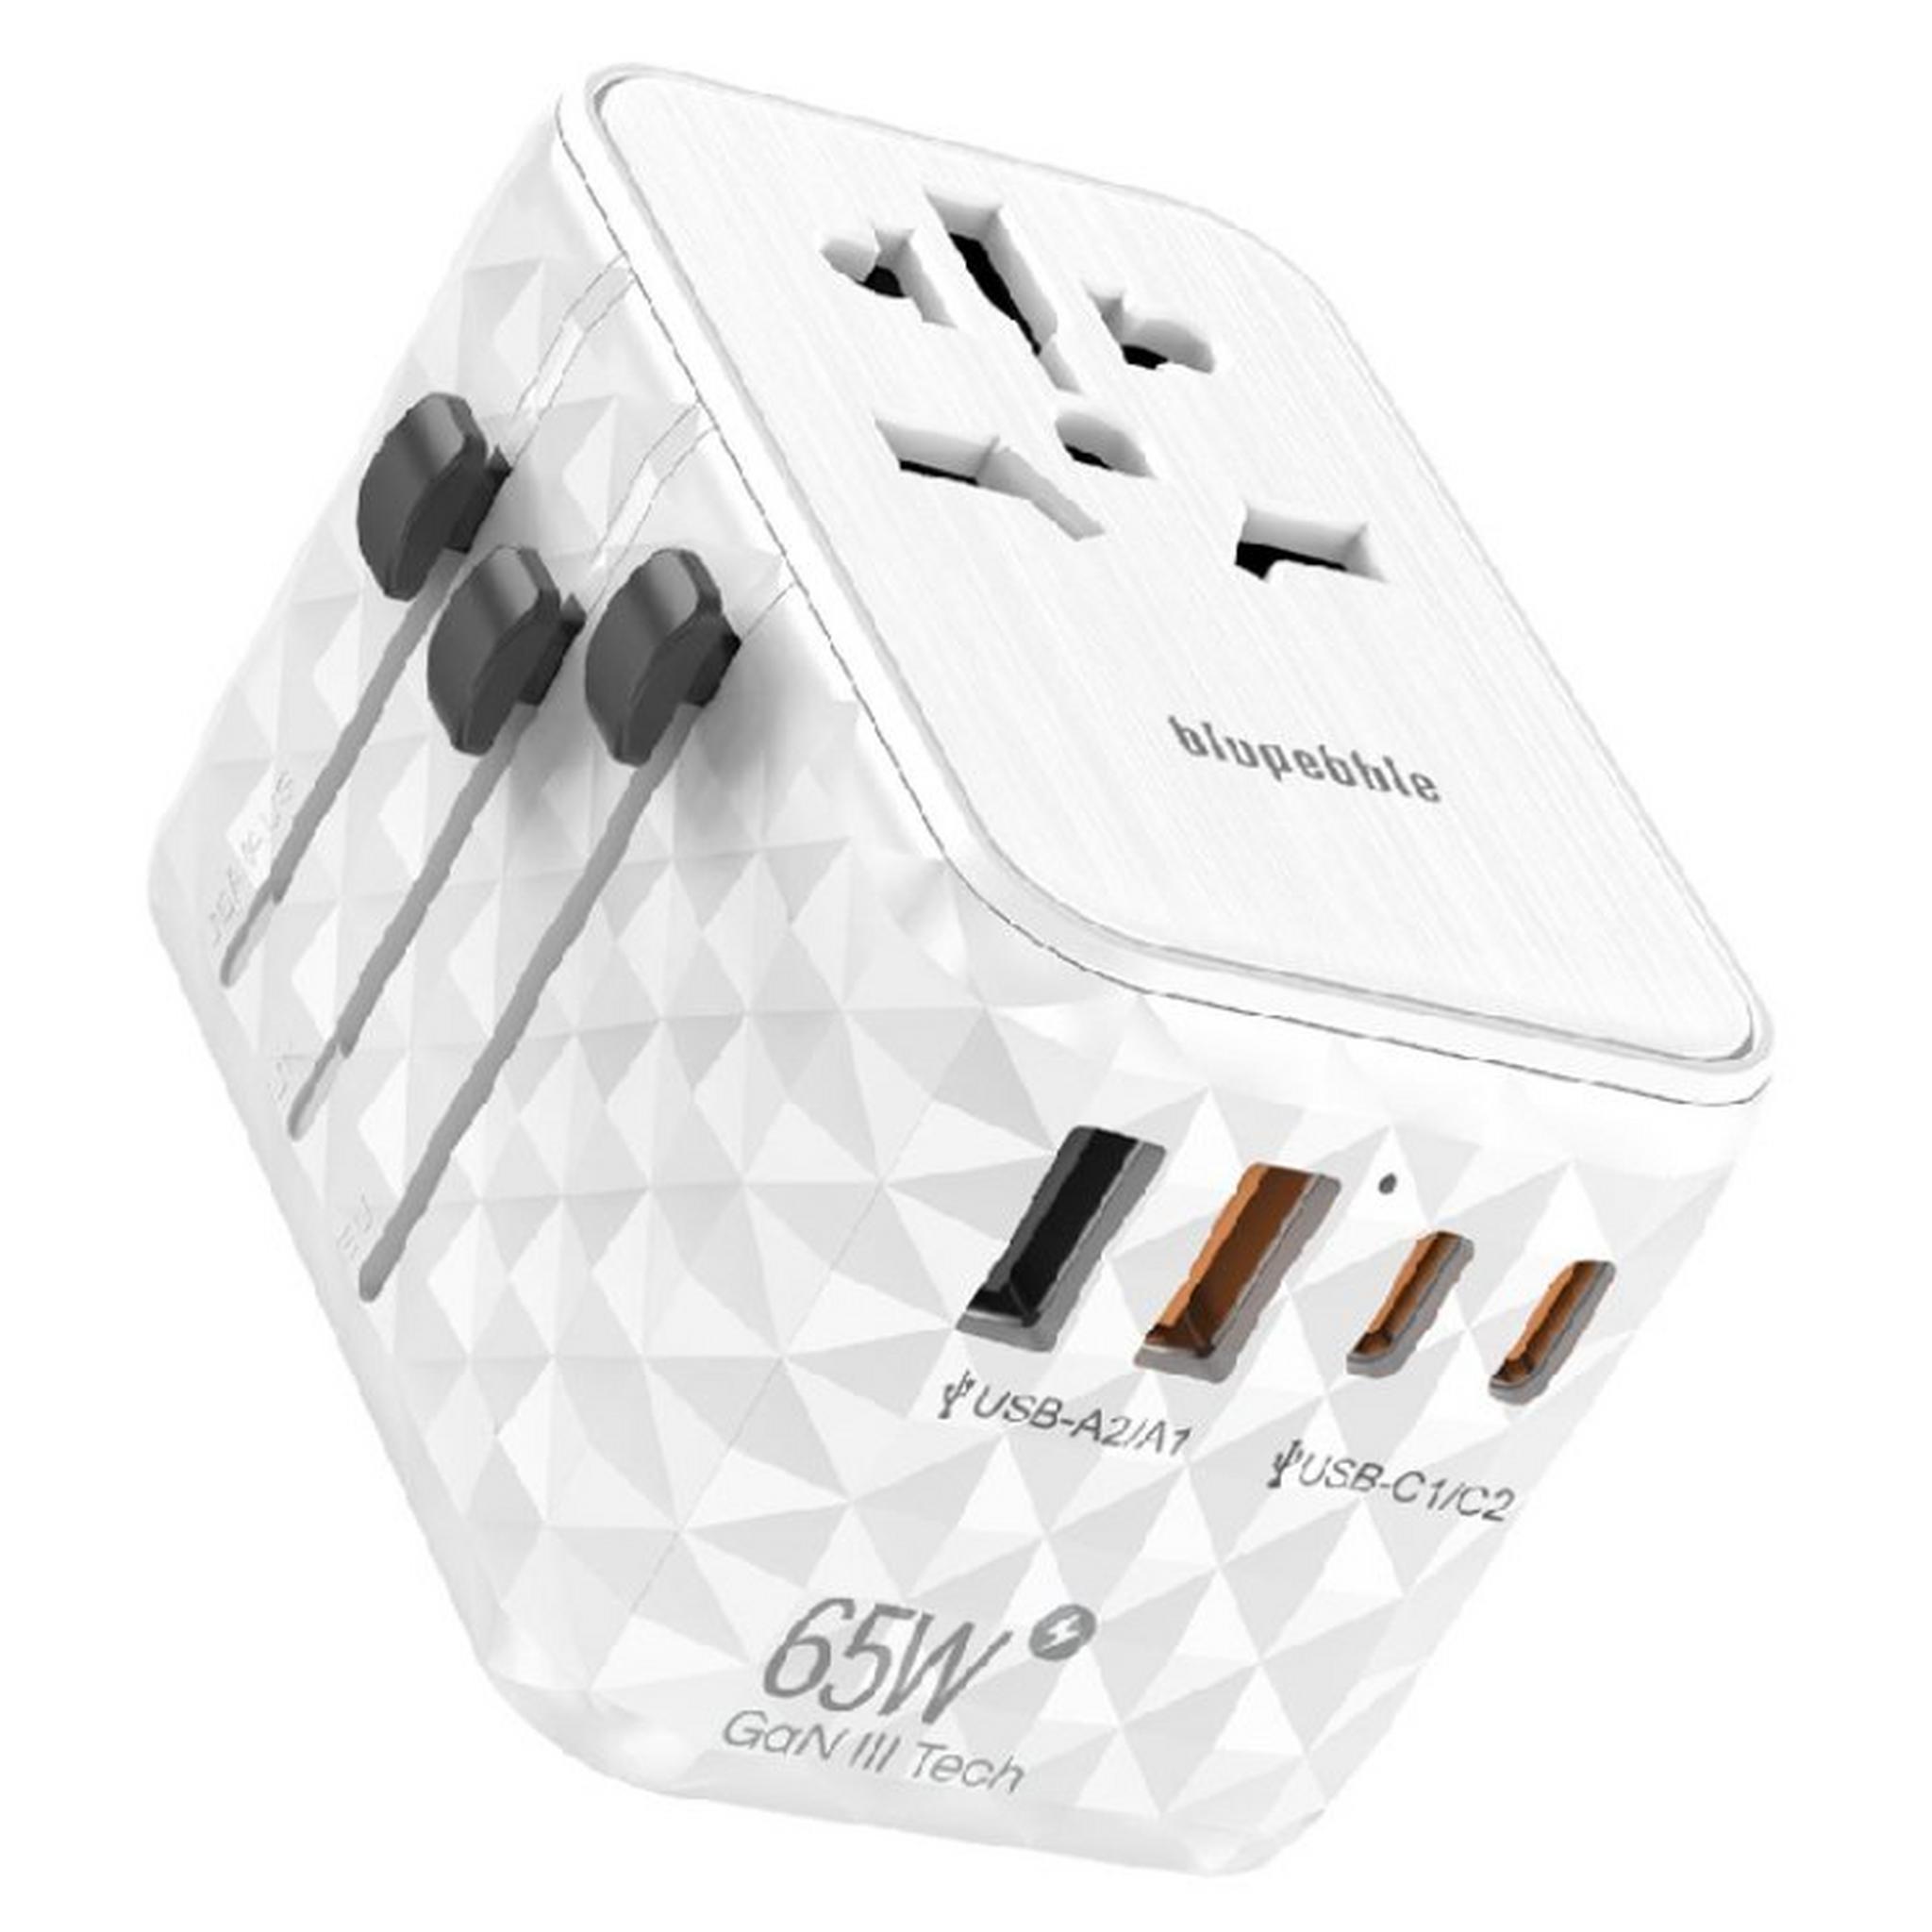 Blupebble Passport 2.1 World Travel Adapter with PD 65W, BP-TVL002D-WH - White